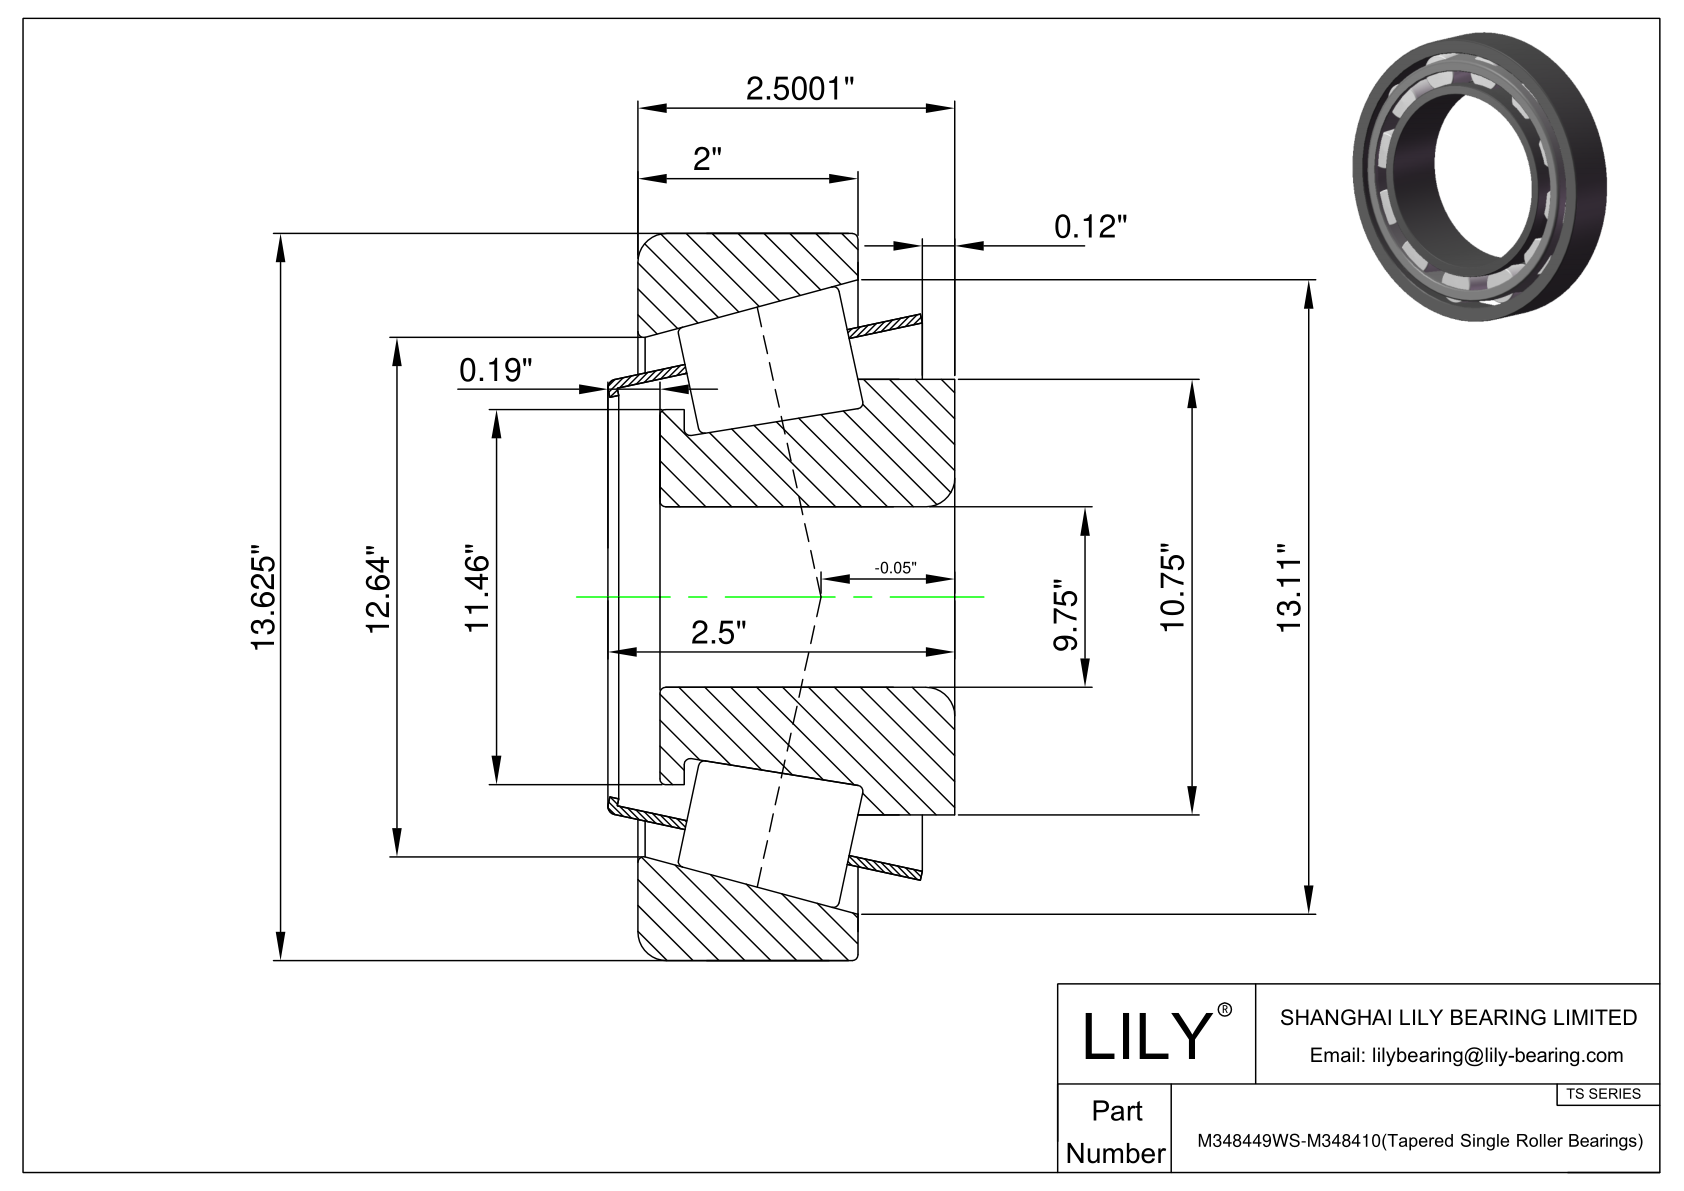 M348449WS-M348410 TS (Tapered Single Roller Bearings) (Imperial) cad drawing